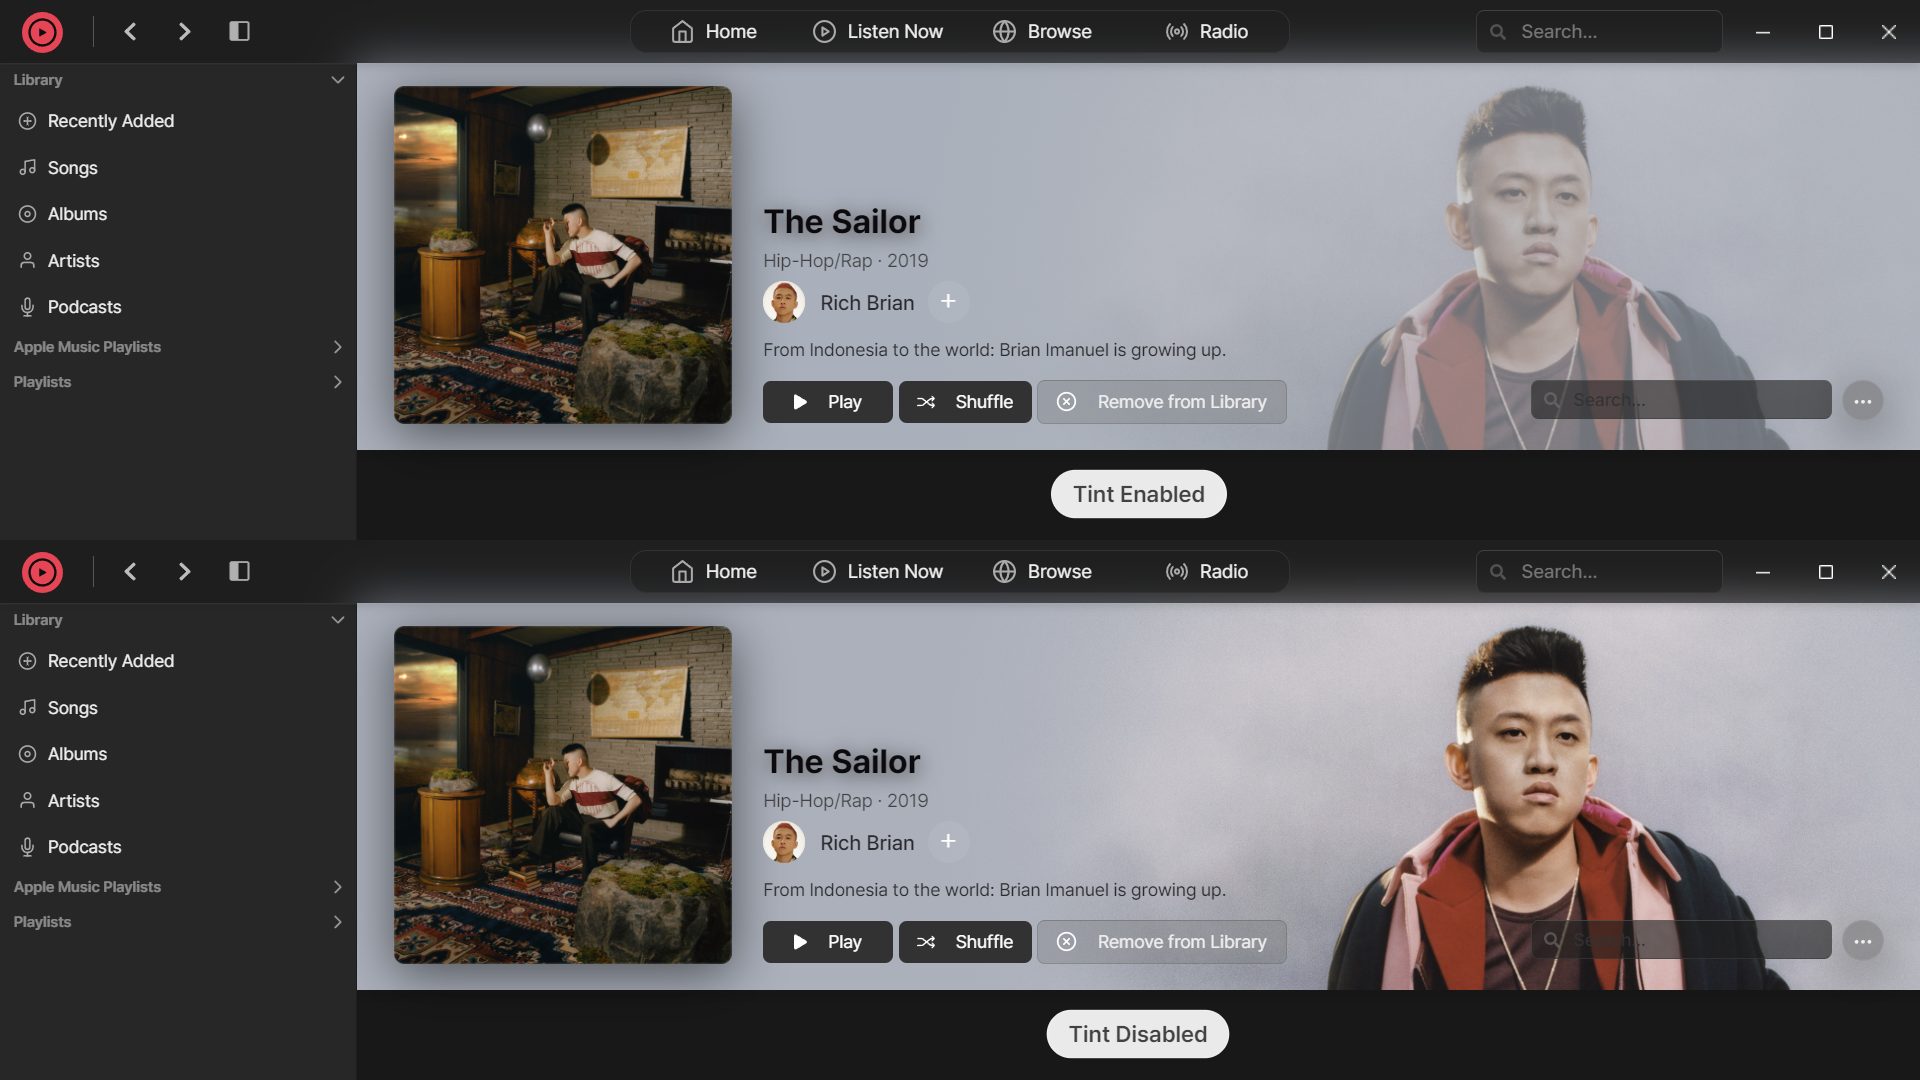 Comparison of the Cider interface before and after applying the theme